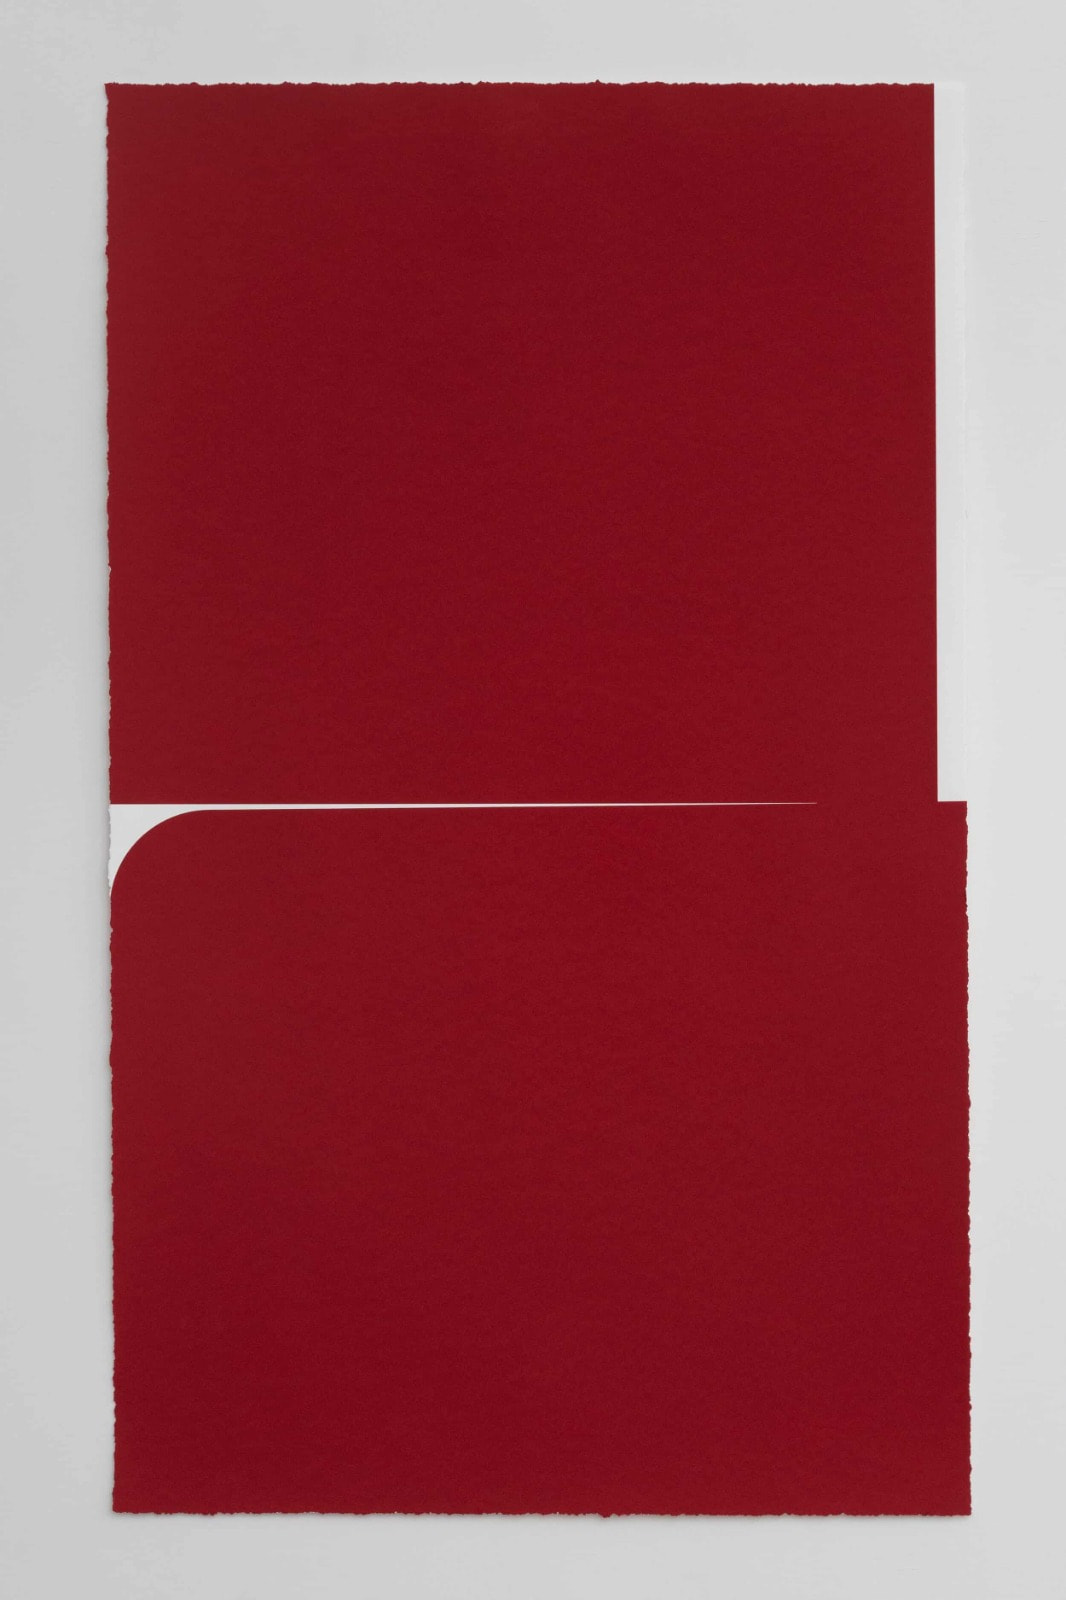 Johnny Abrahams - Untitled (Red) - 2021